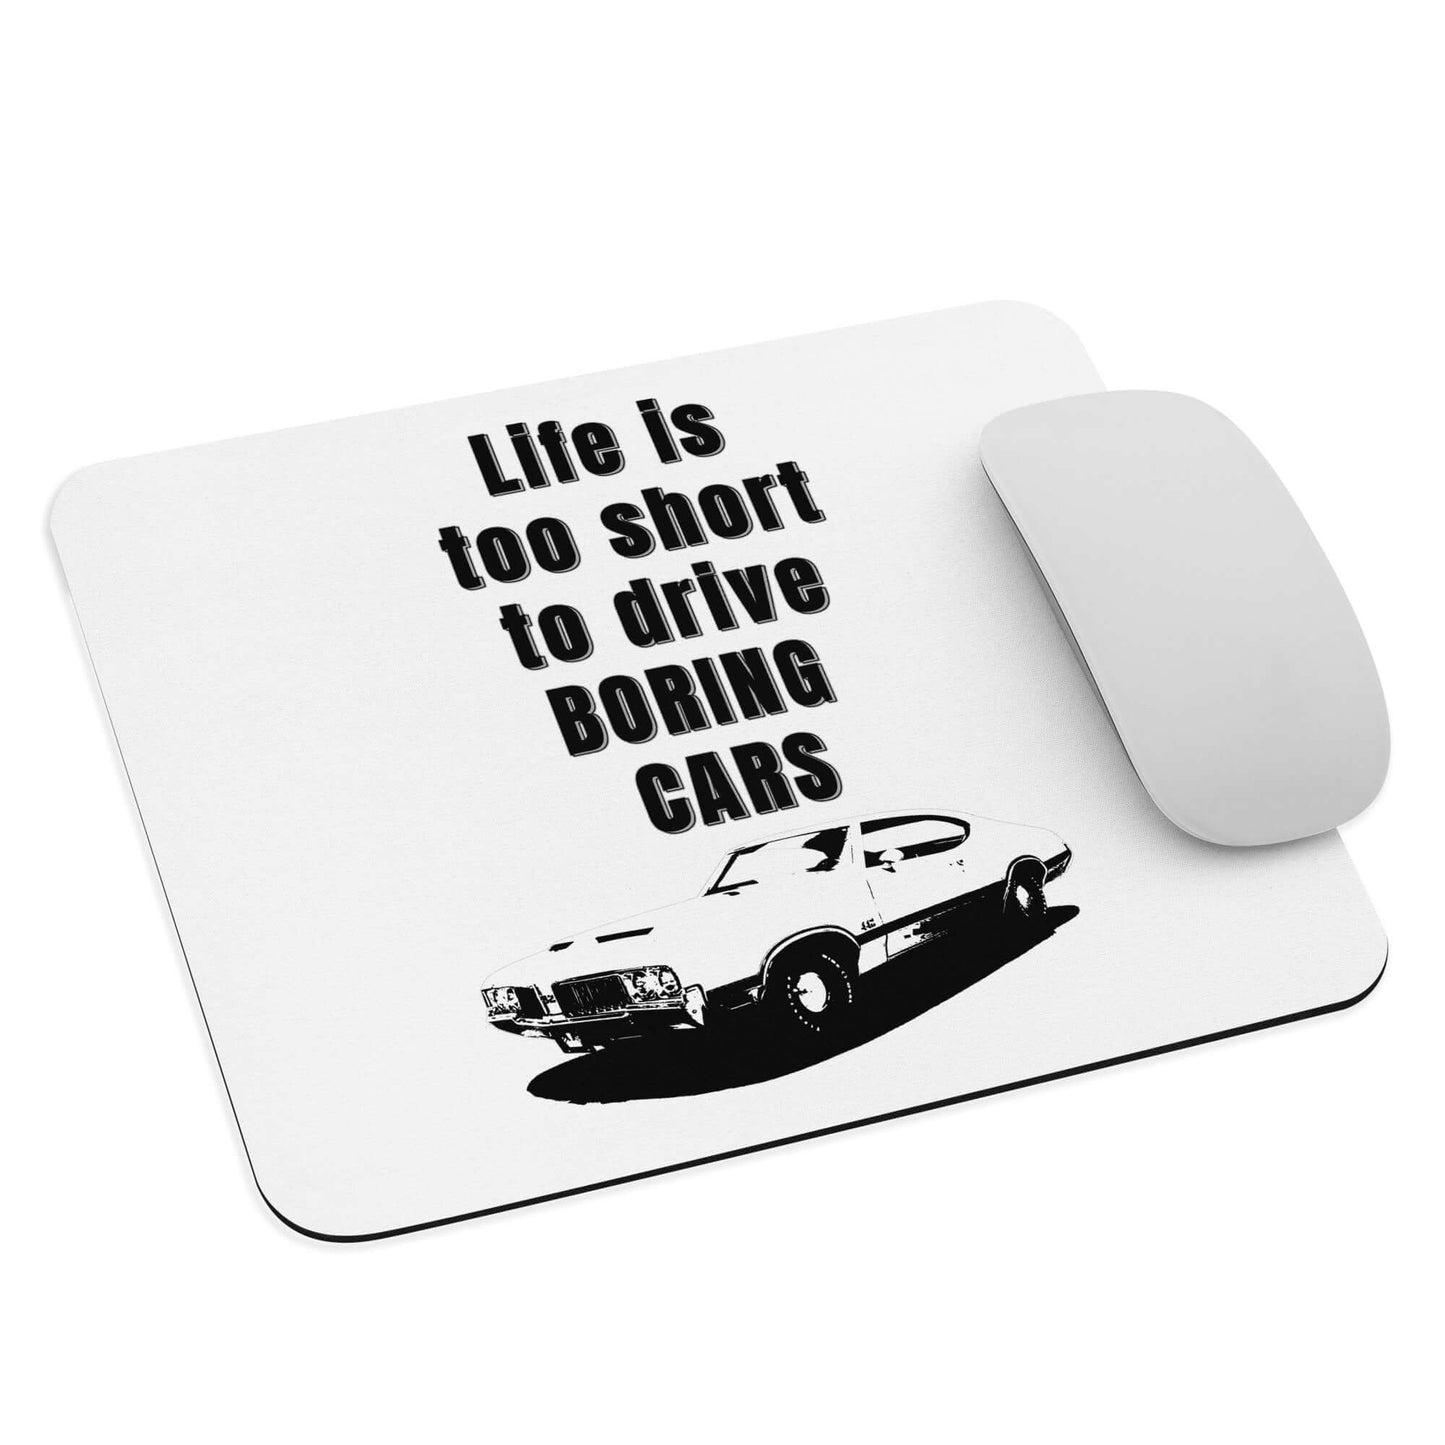 Life is too short to be driving boring cars - 1970 Oldsmobile 442 - Mouse pad - Horrible Designs